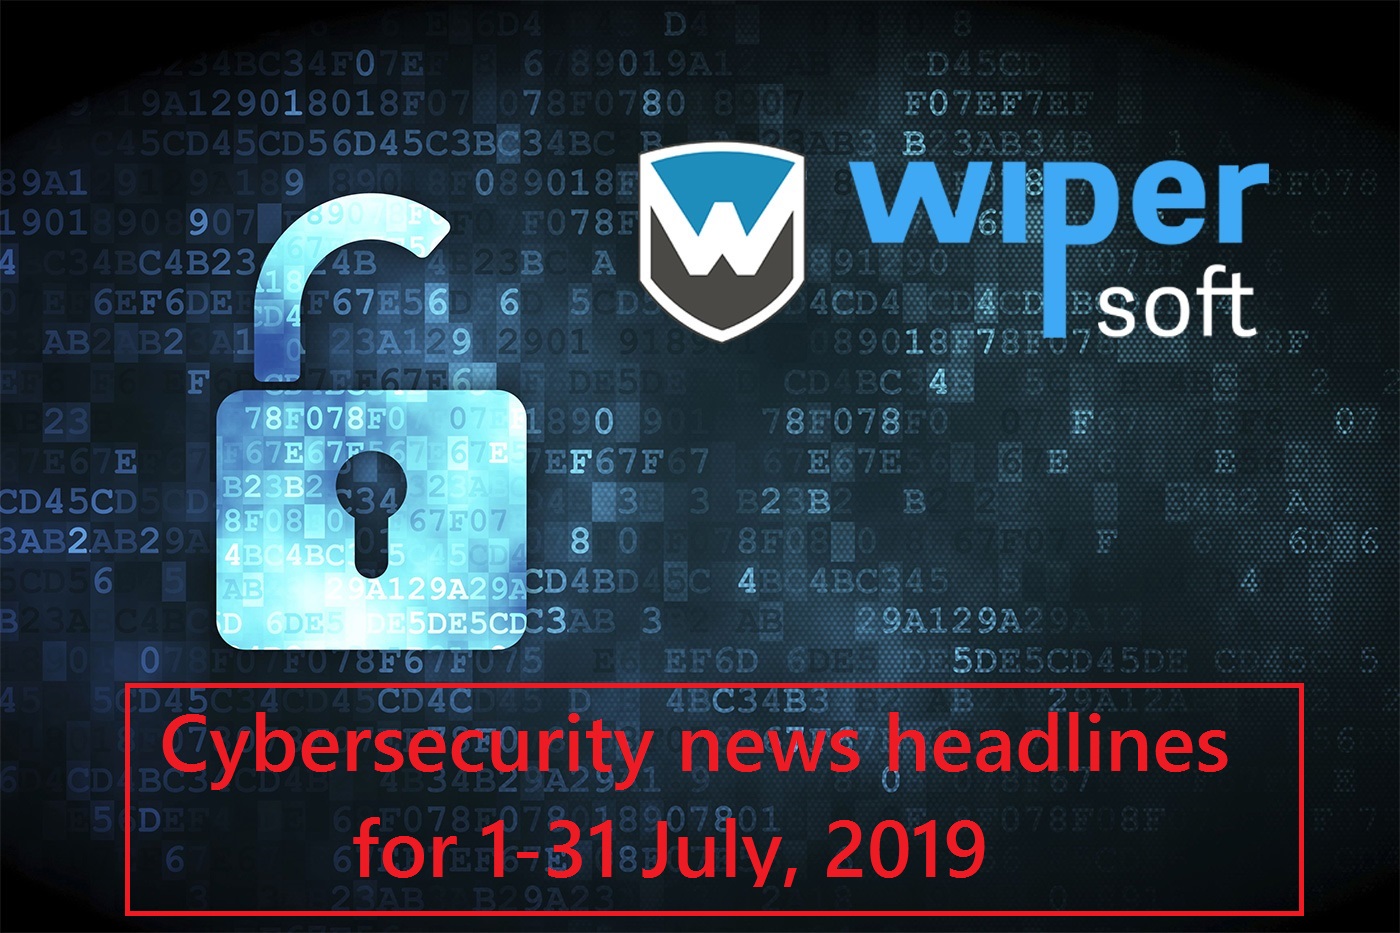 Cybersecurity news headlines for 1-31 July, 2019